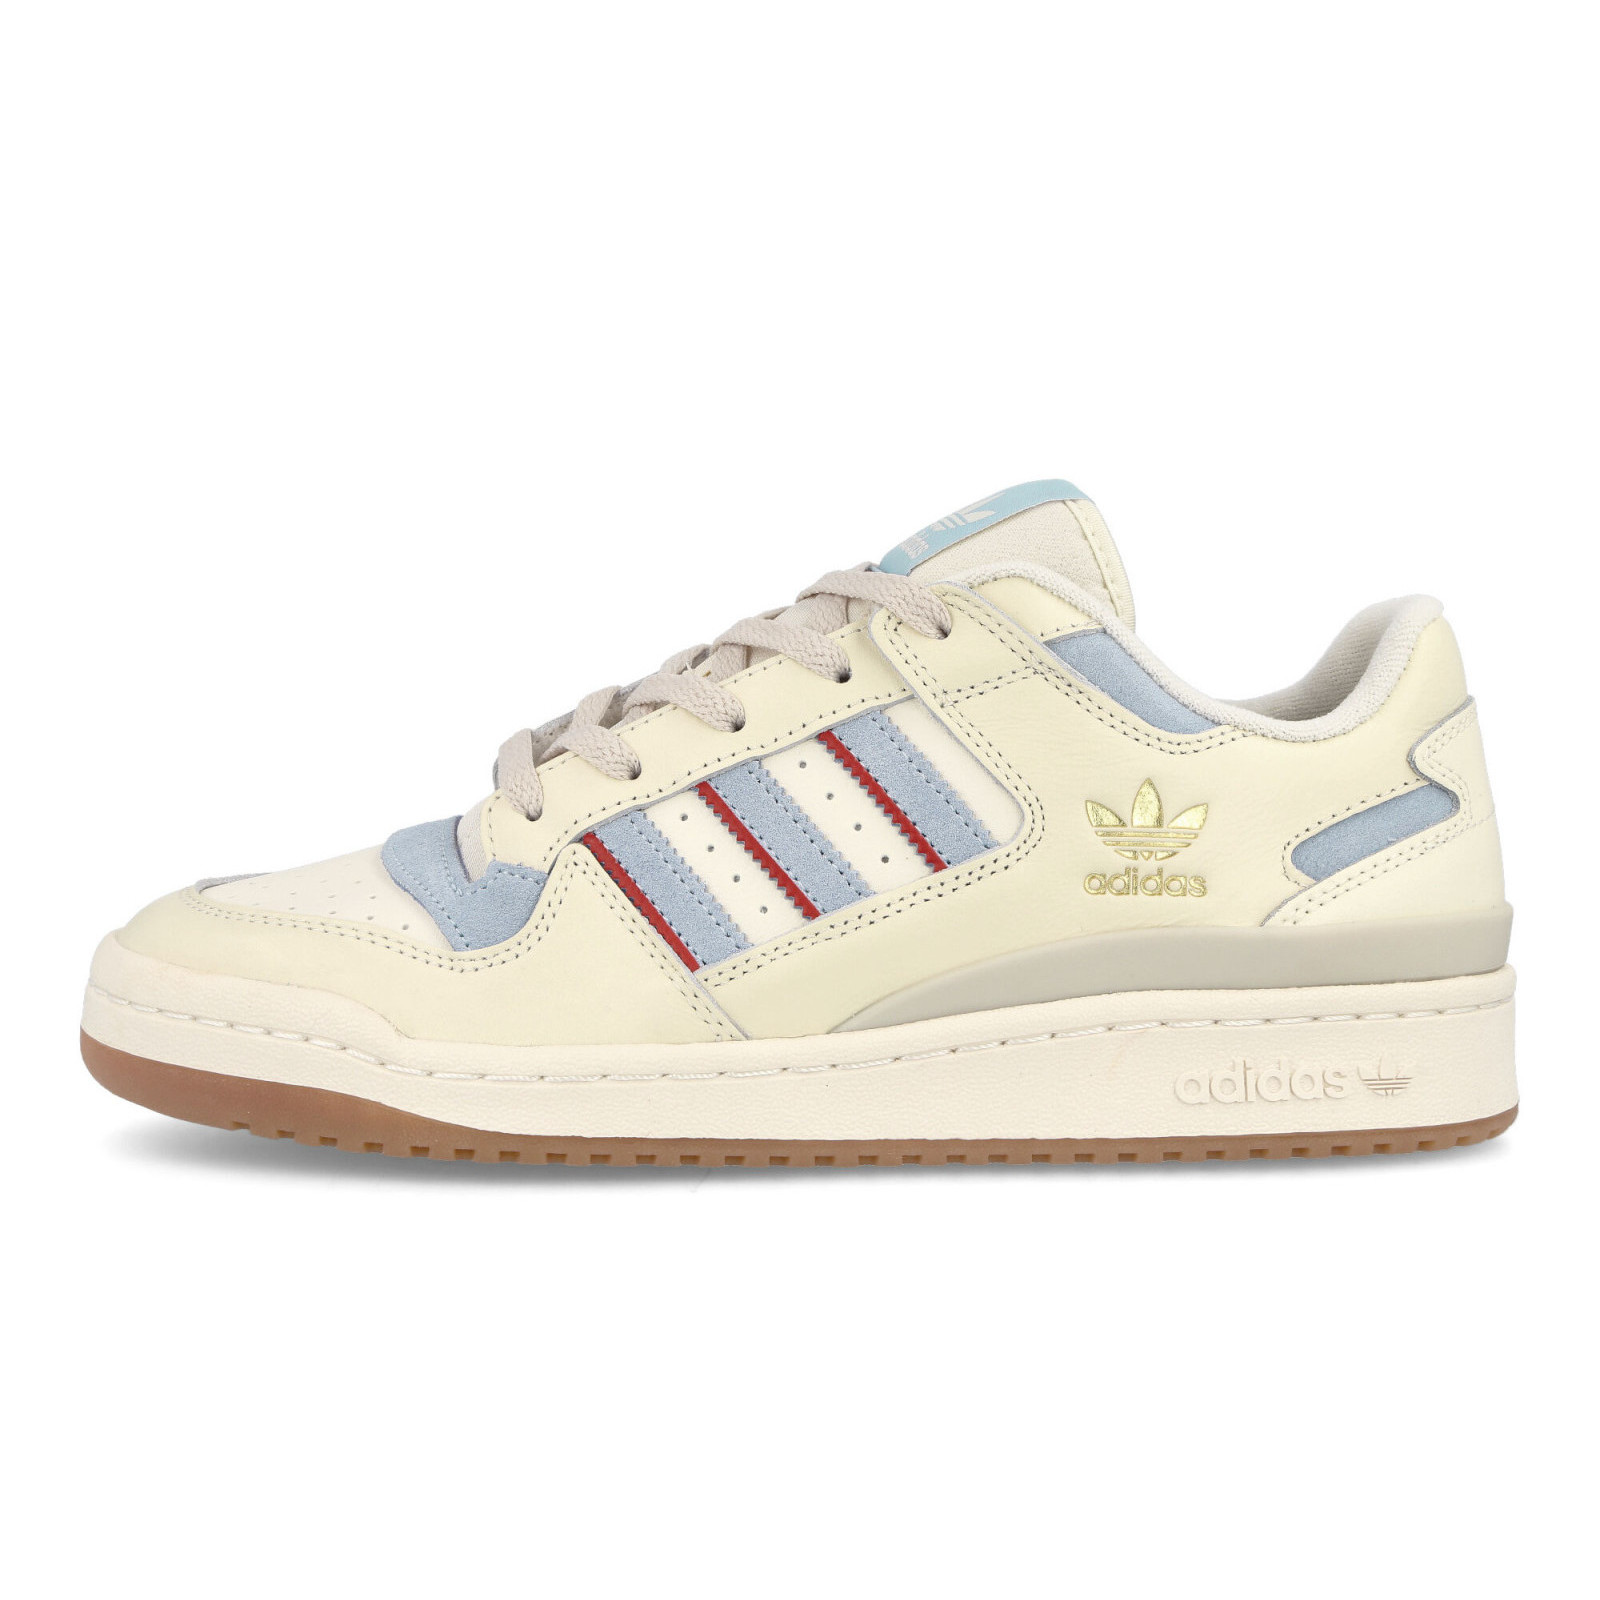 Adidas Forum Low Classic
White / Blue Red